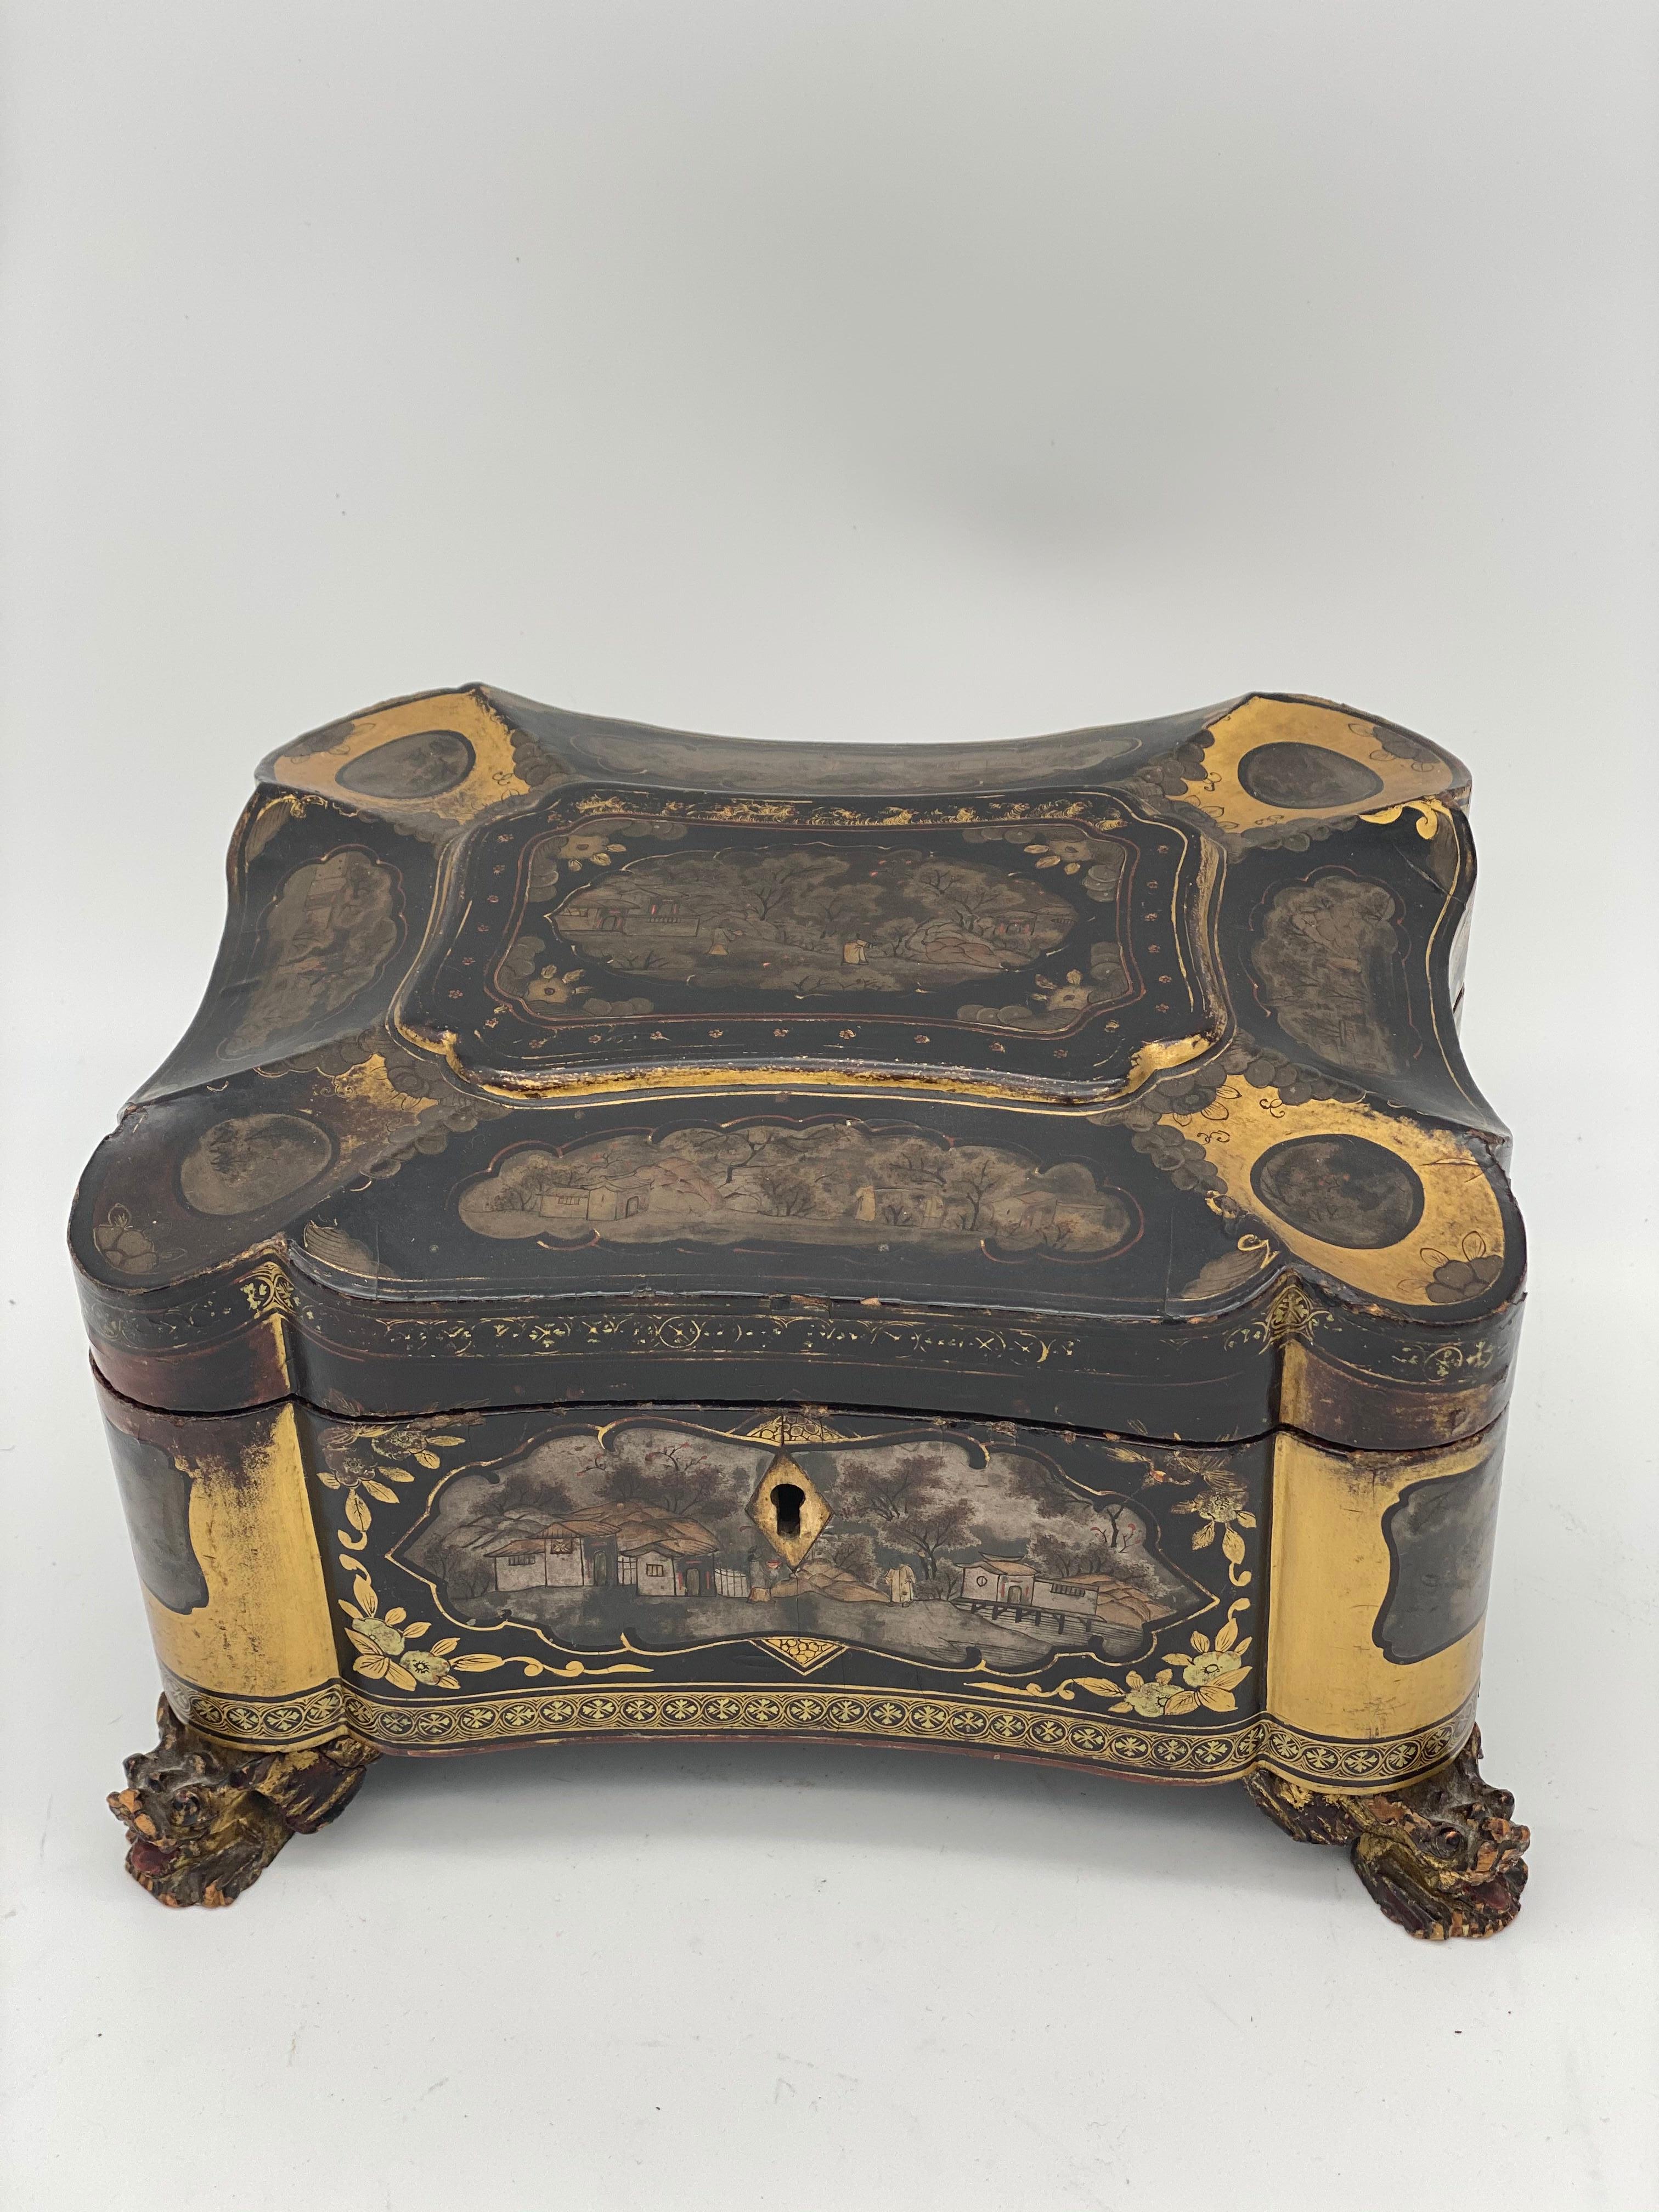 Hand-Carved 19th Century Gilt Lacquer Chinese Tea Caddy For Sale